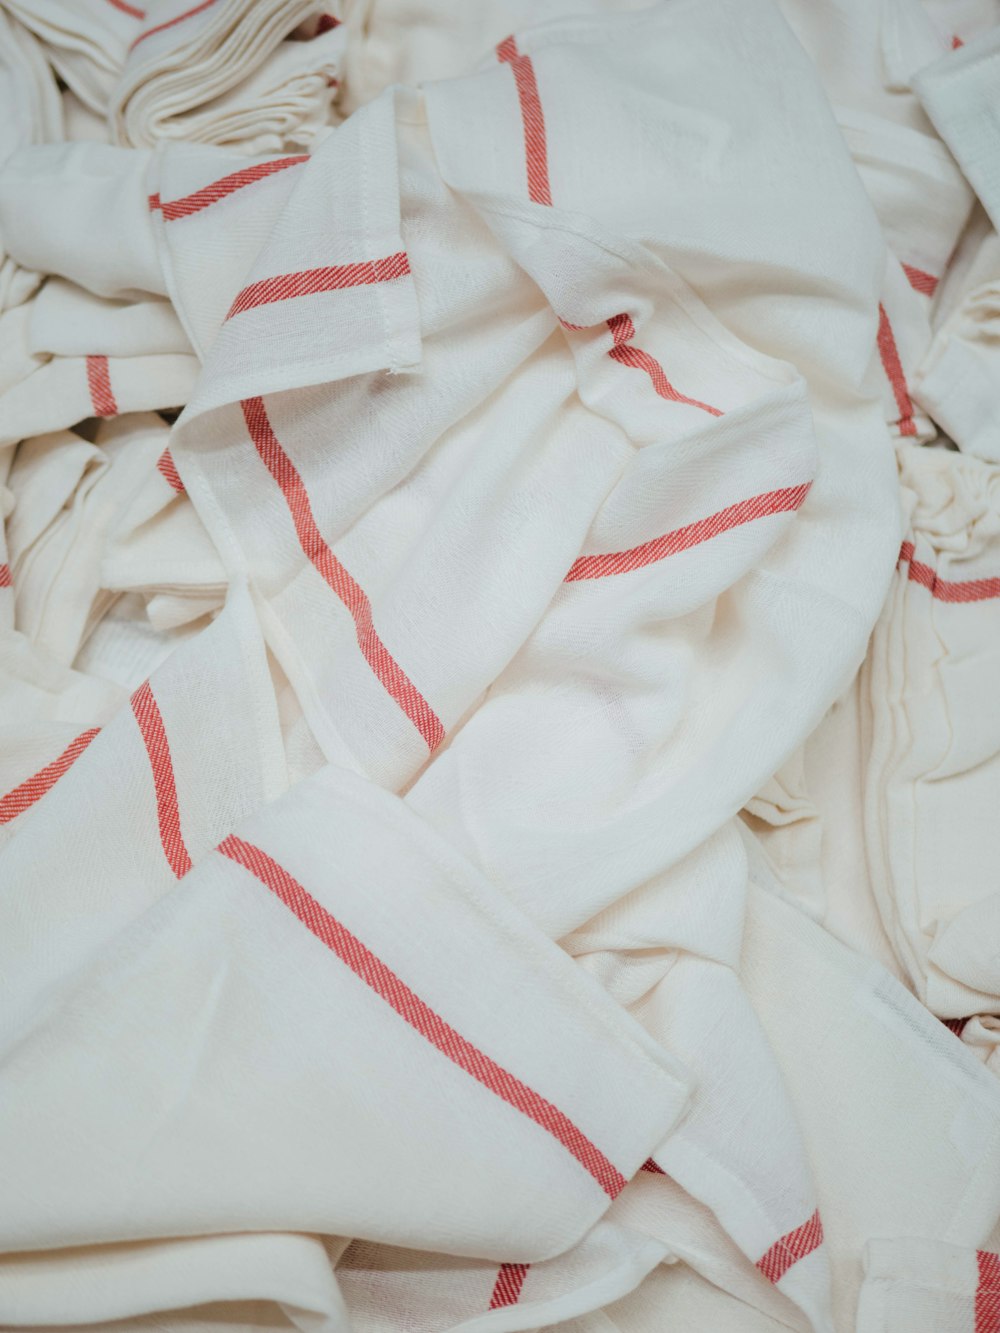 white and red textiles